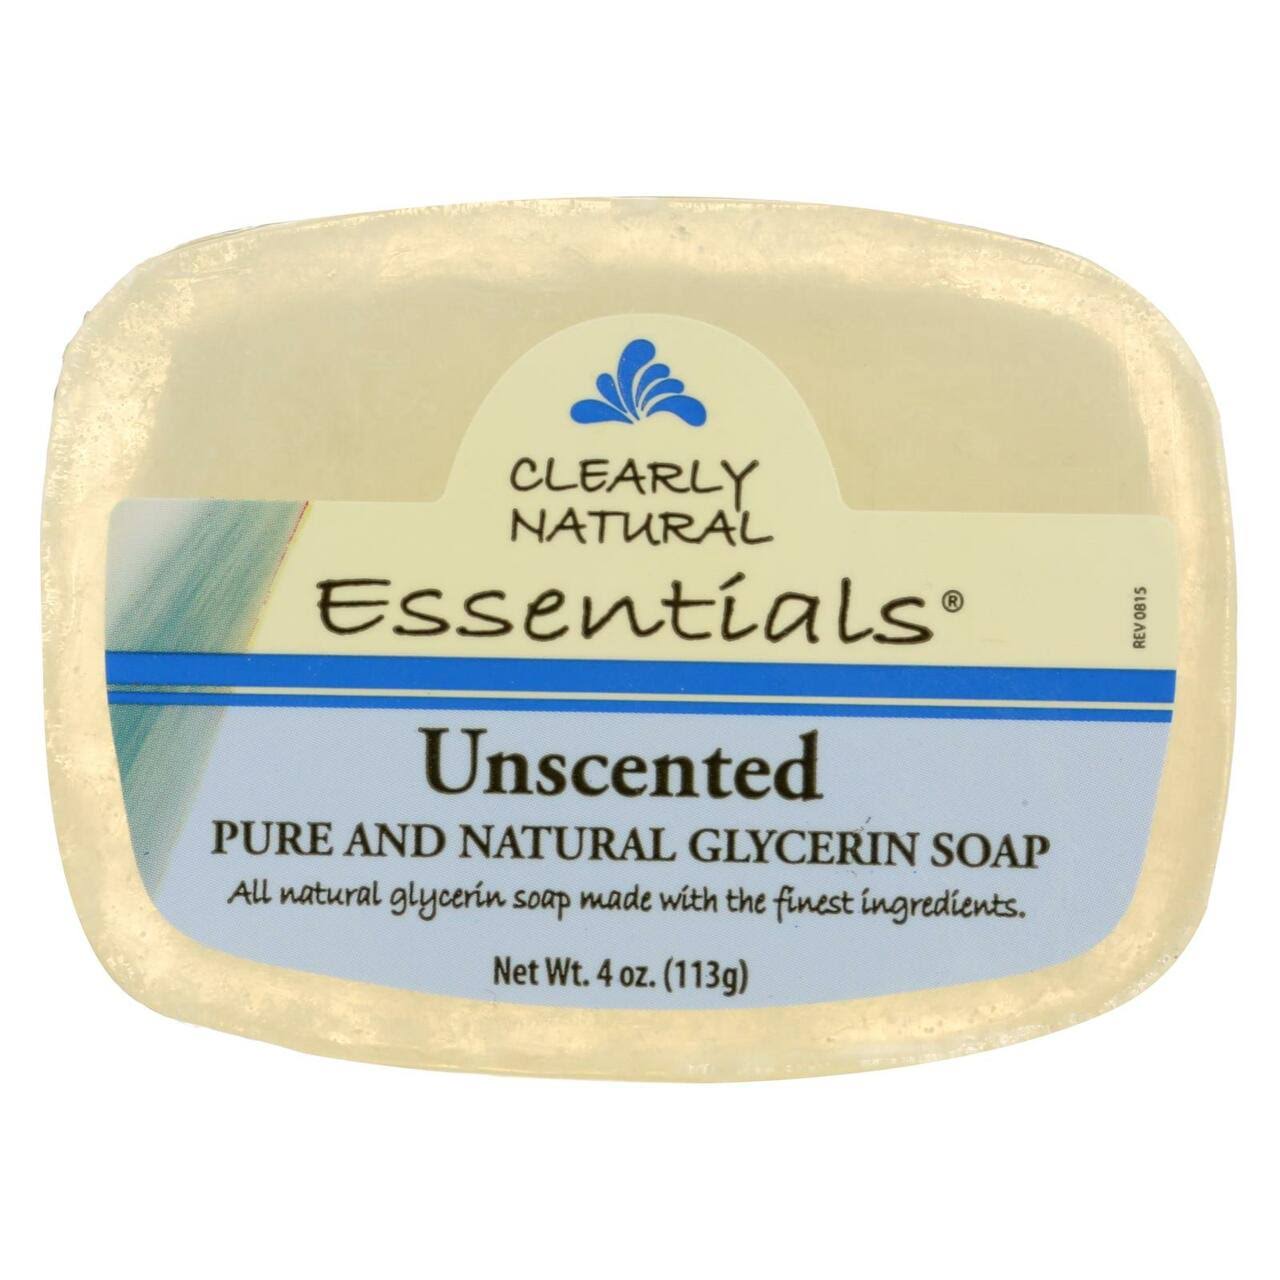 Clearly Natural Glycerine Soap - Unscented, 4 oz